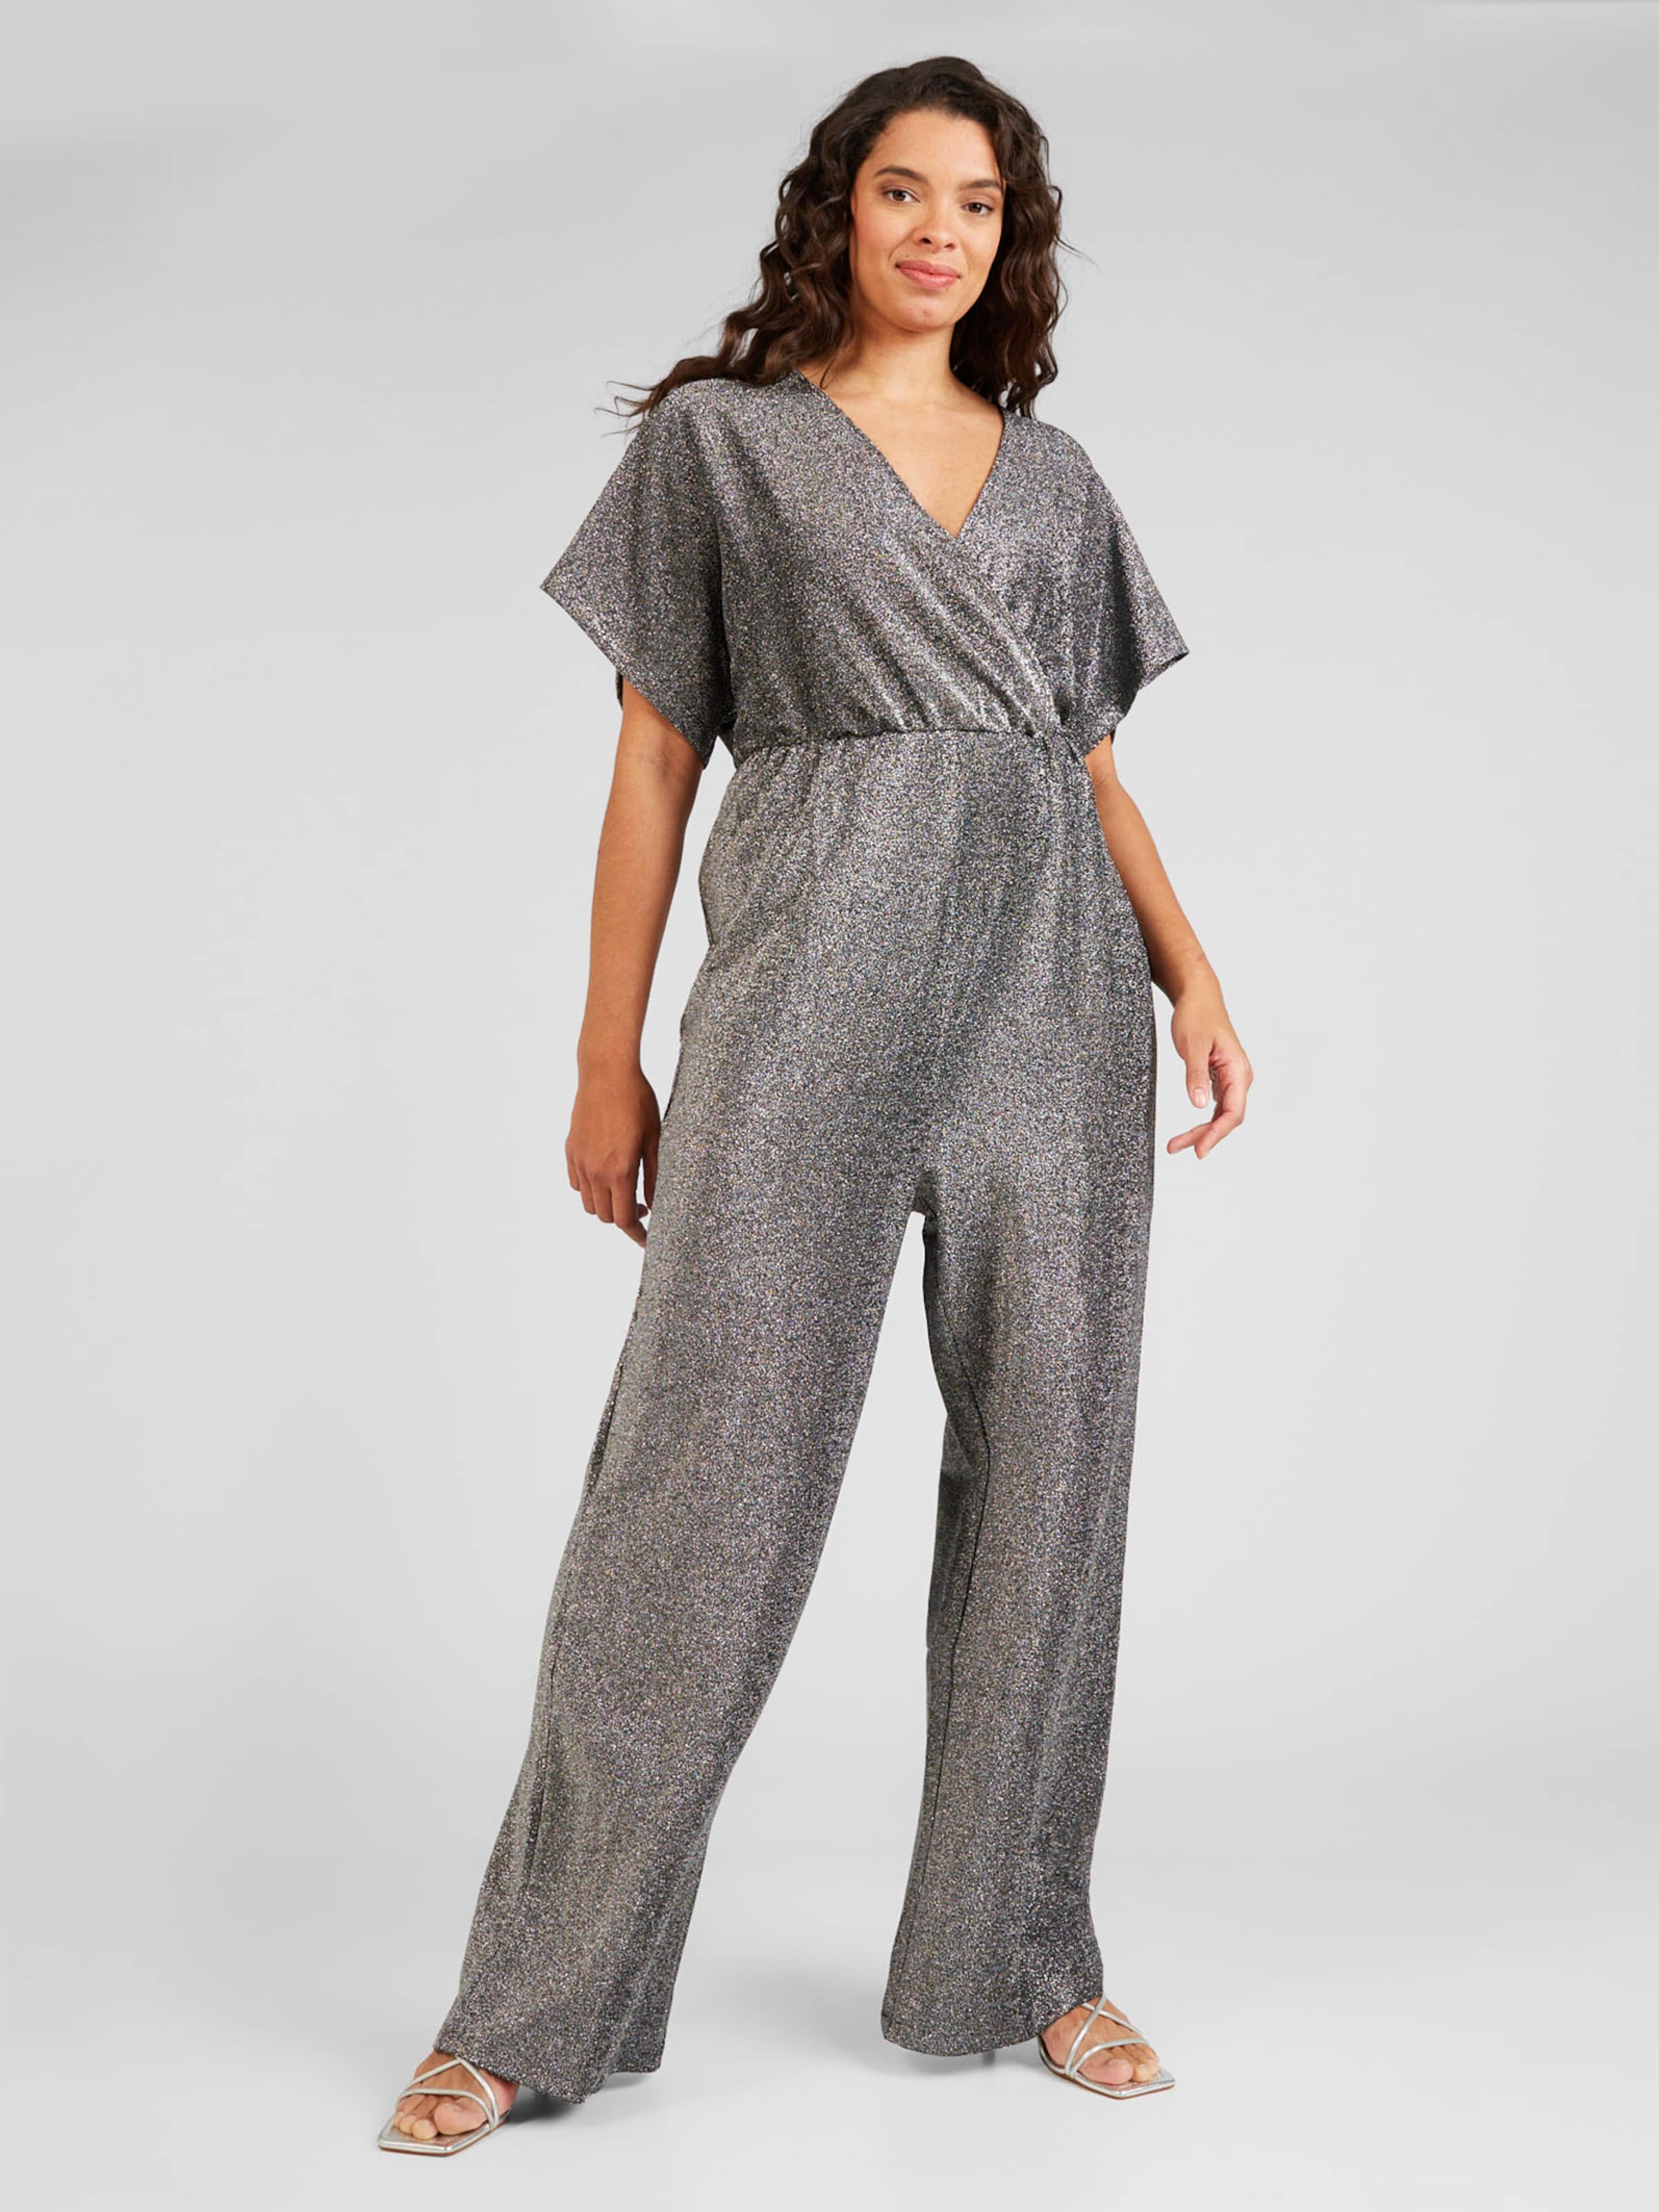 Rissing Star Casual Jumpsuits|Fimkastore.com: Online Shopping Wholesale  Womens Clothing